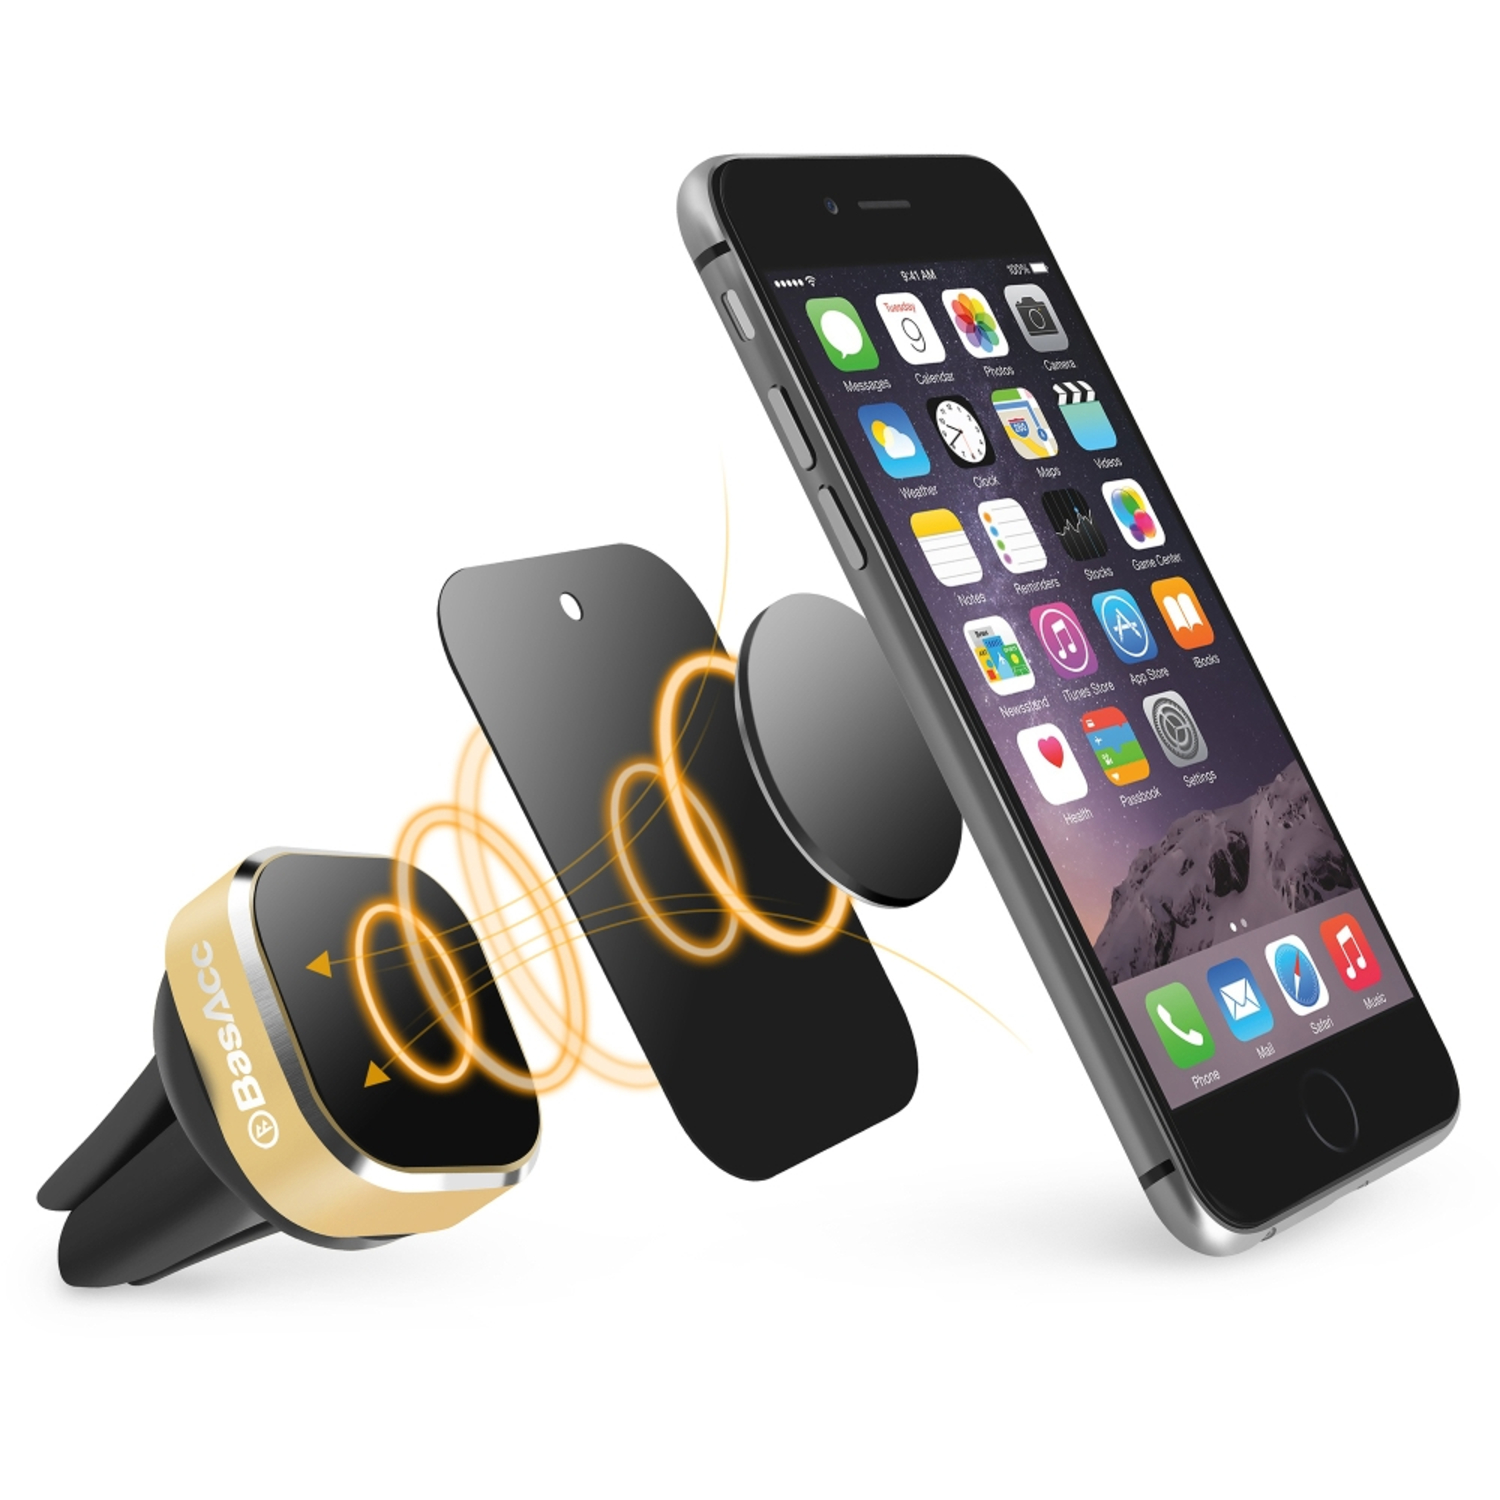 BasAcc Universal Magnetic Car Mount Air Vent Phone Holder For Smartphones & Mini Tablets Up to 7 Inches, Black\/Gold